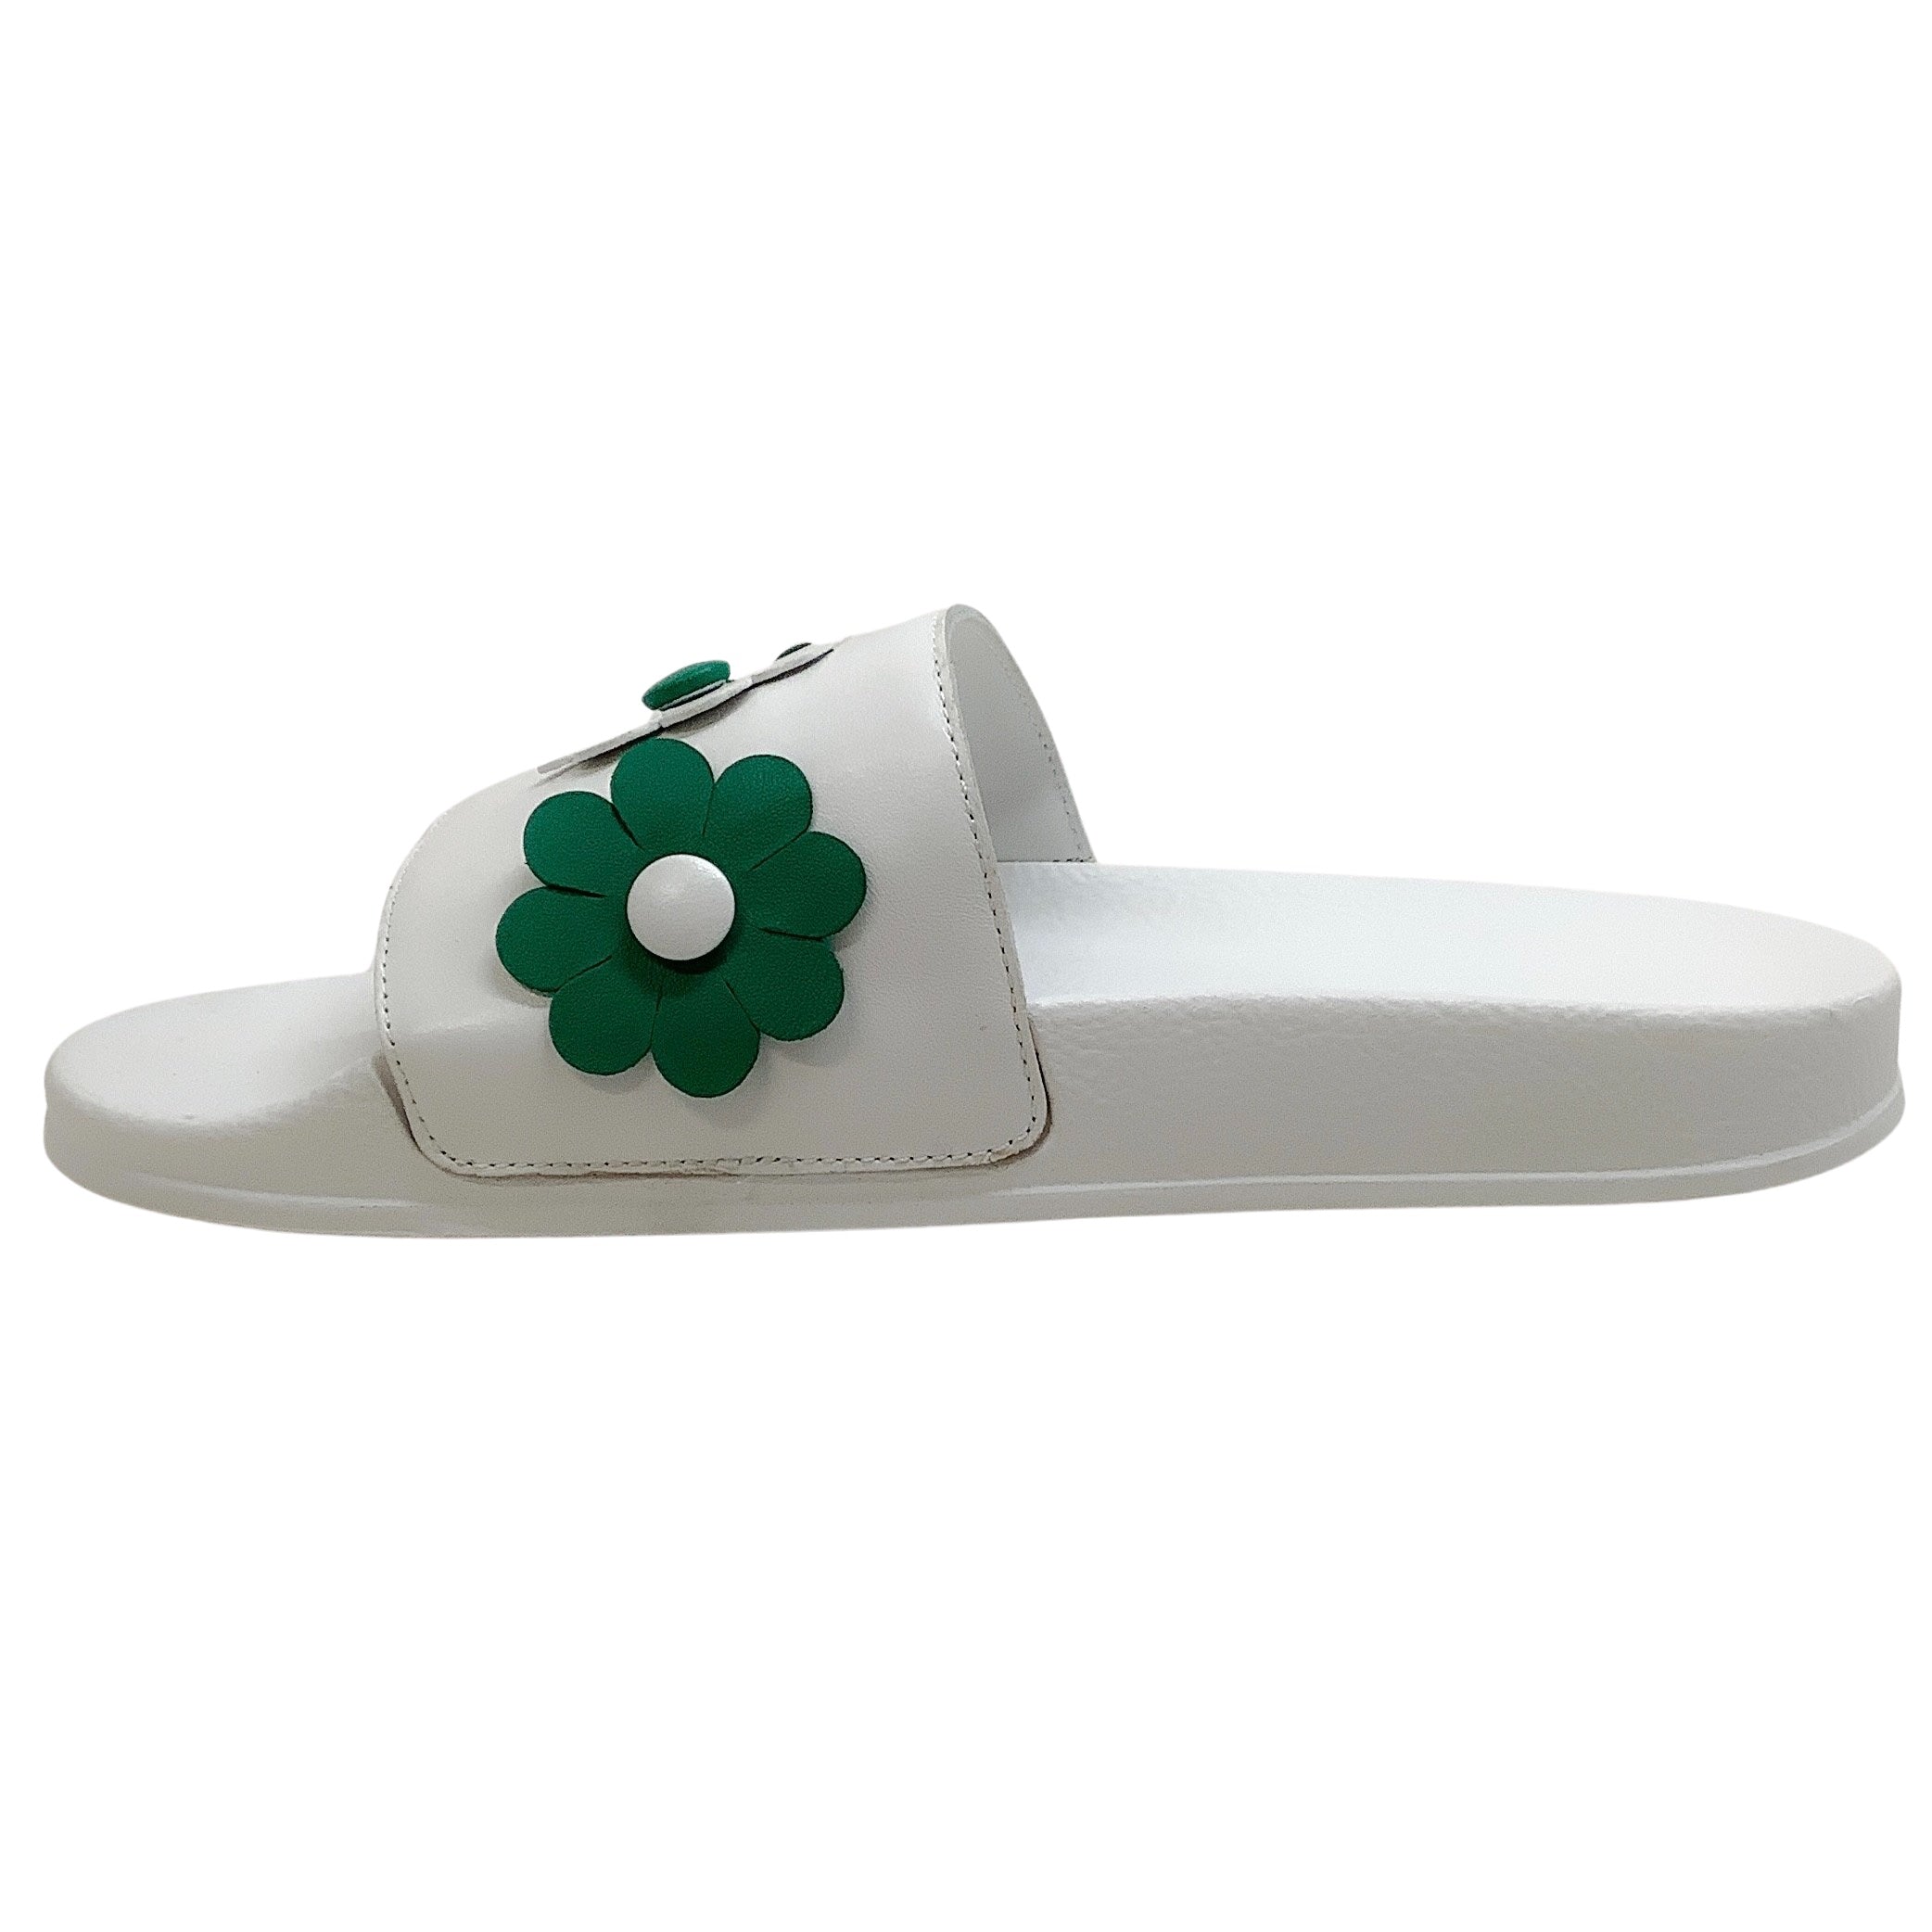 Vivetta White Leather Slide Sandals with Green Flowers